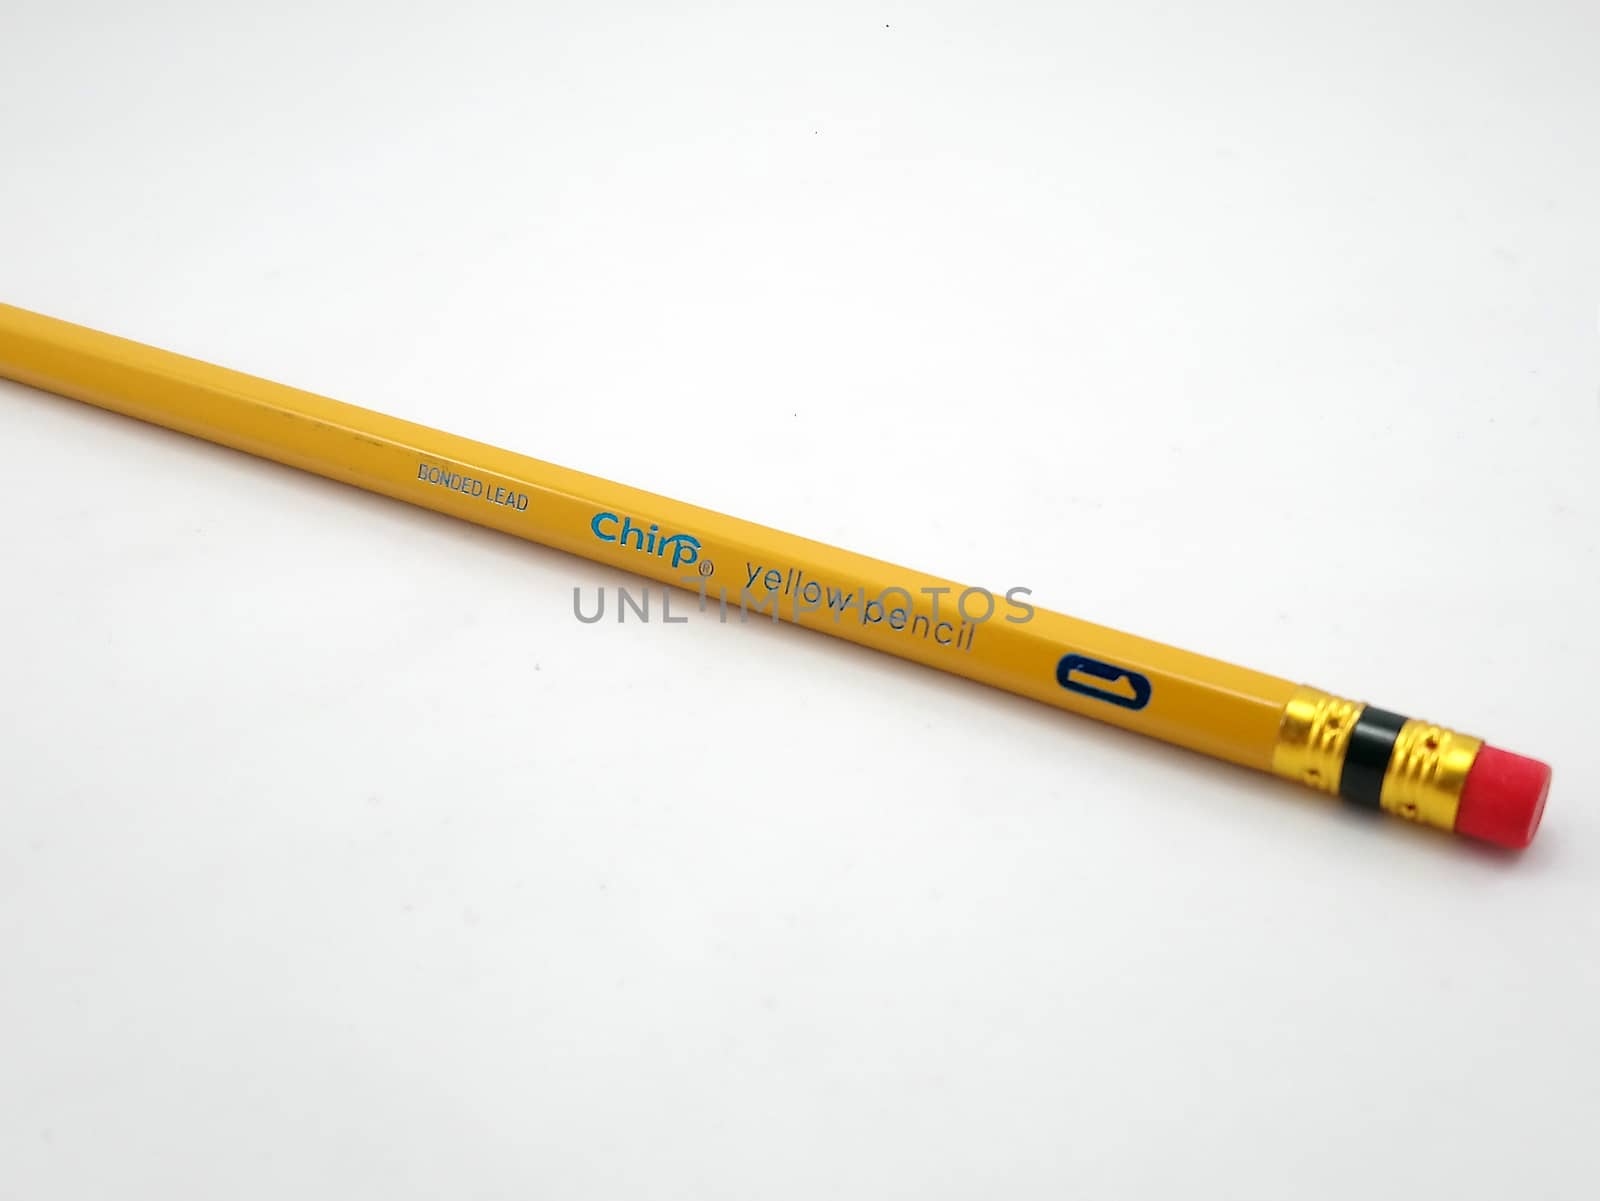 Chirp yellow pencil in Manila, Philippines by imwaltersy